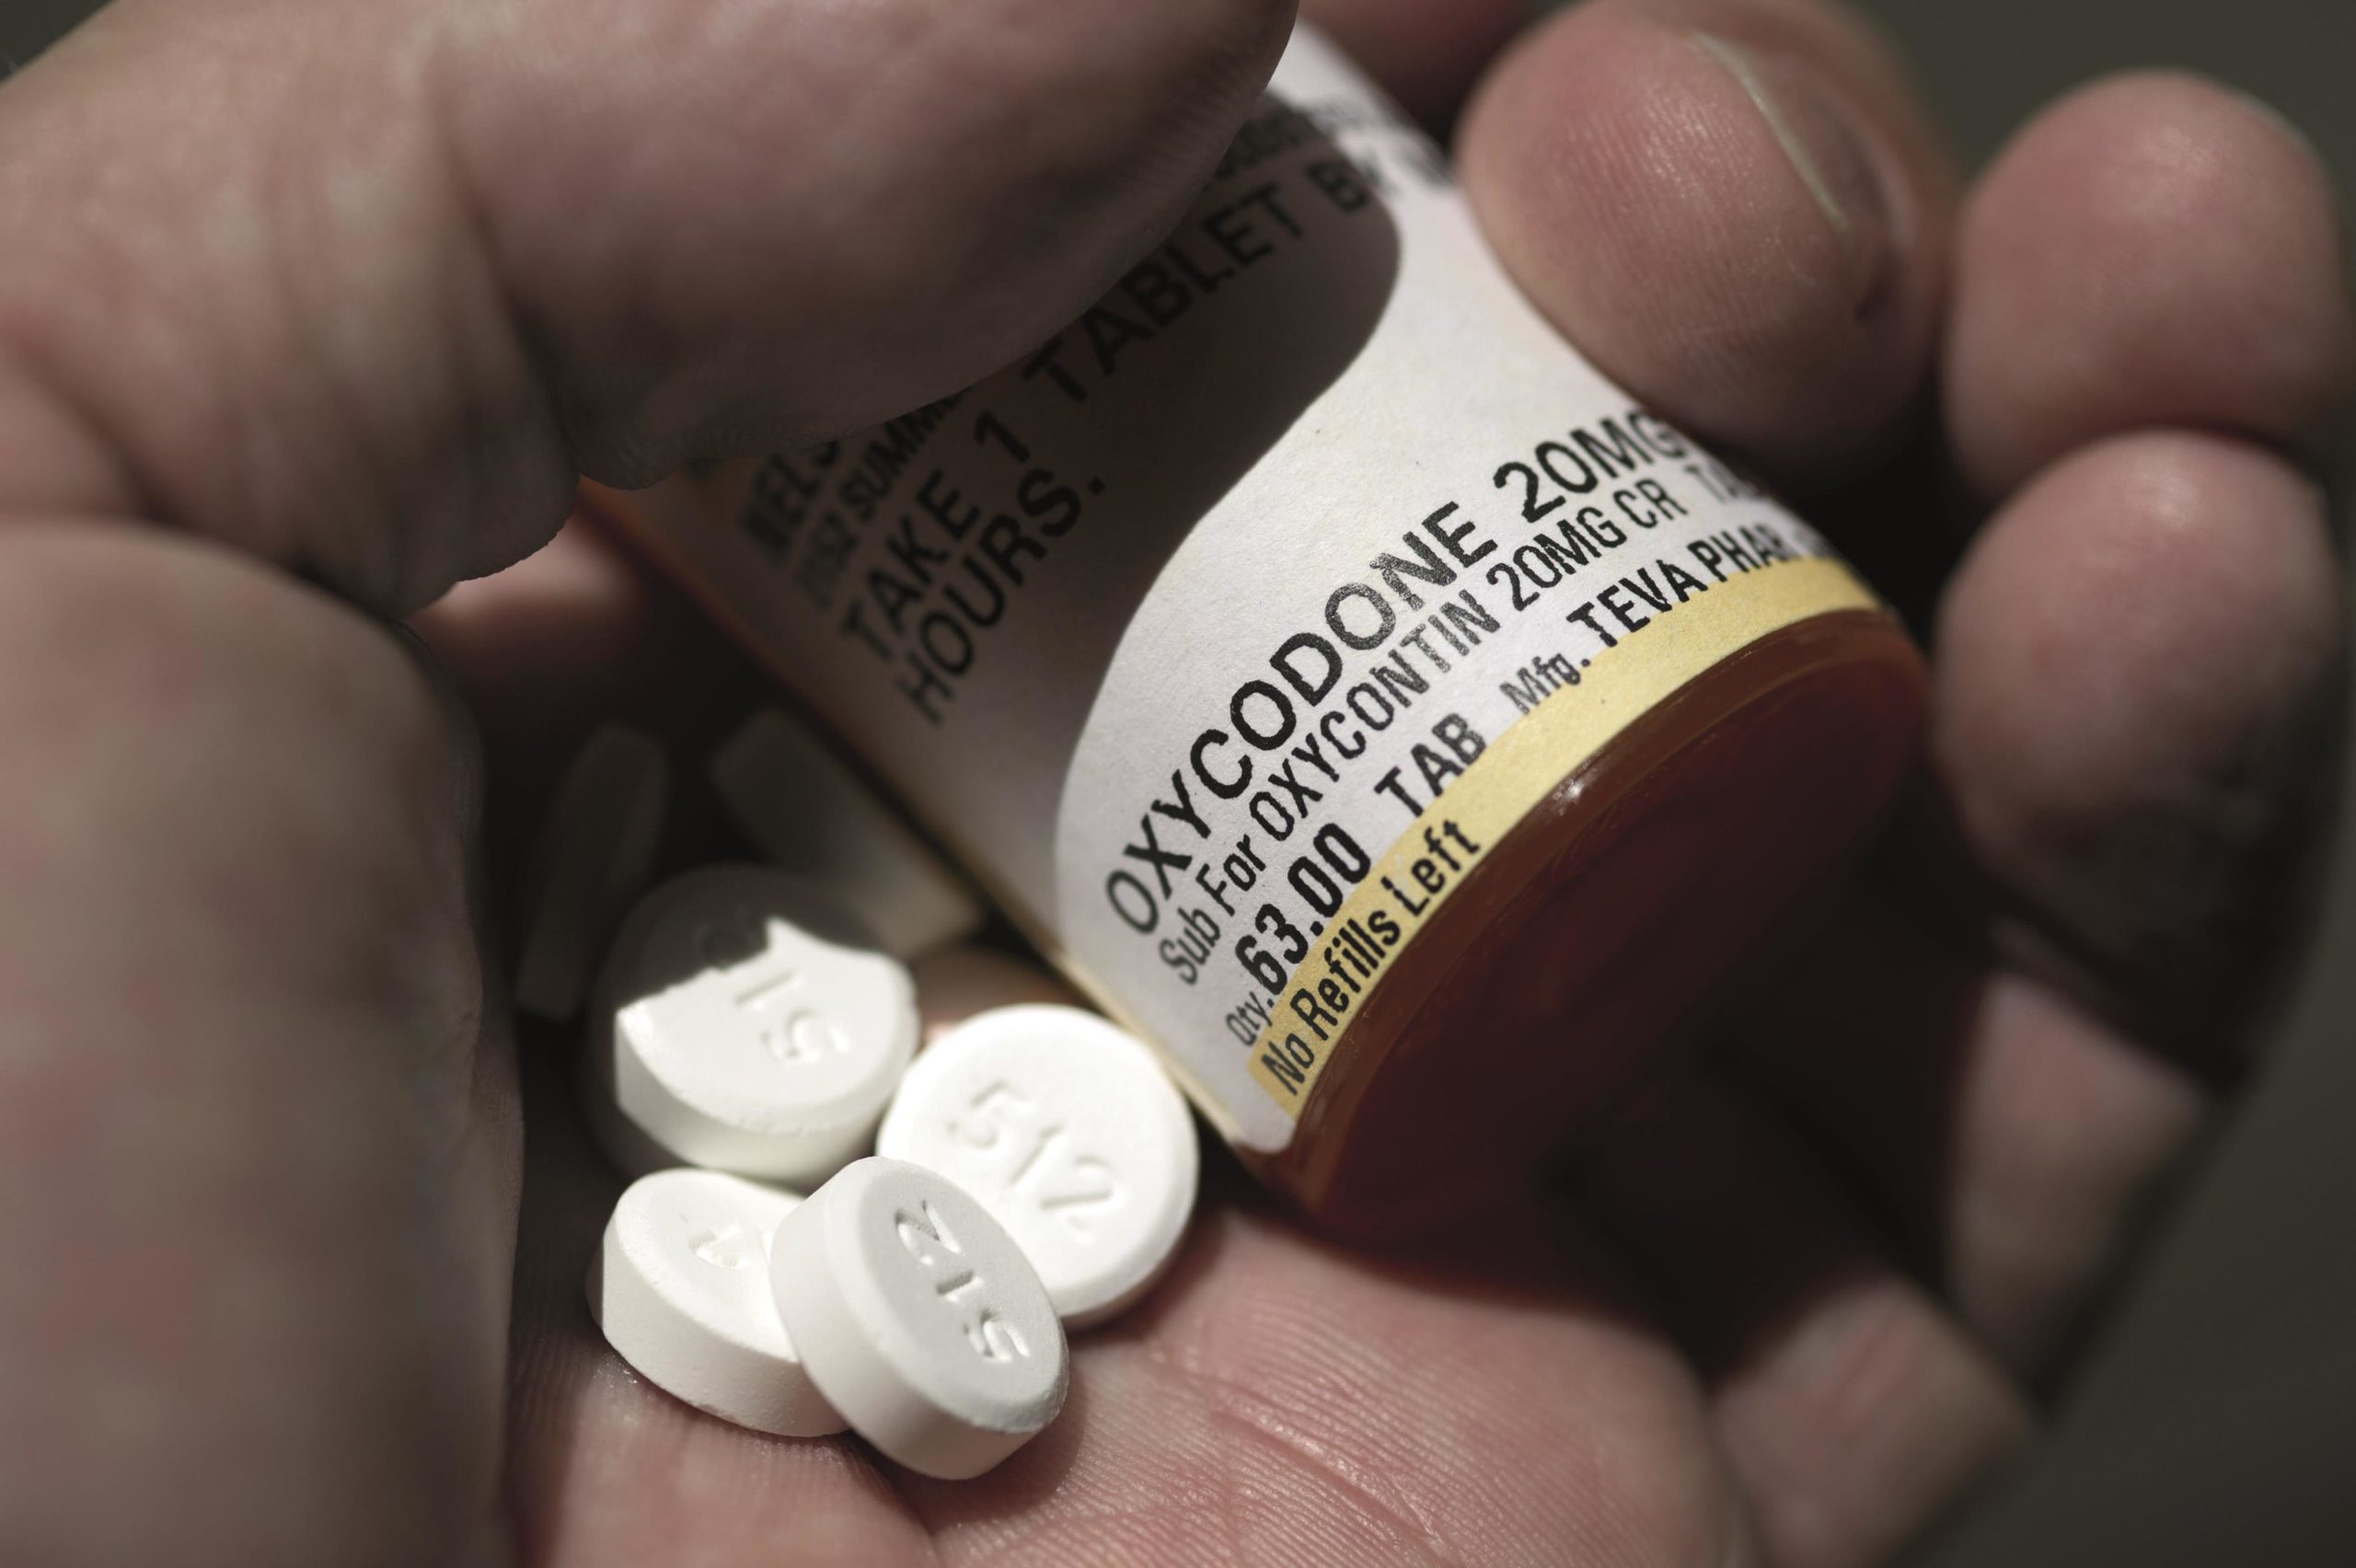 FDA approves opioid Oxycontin for adolescents The Pharmaceutical Journal